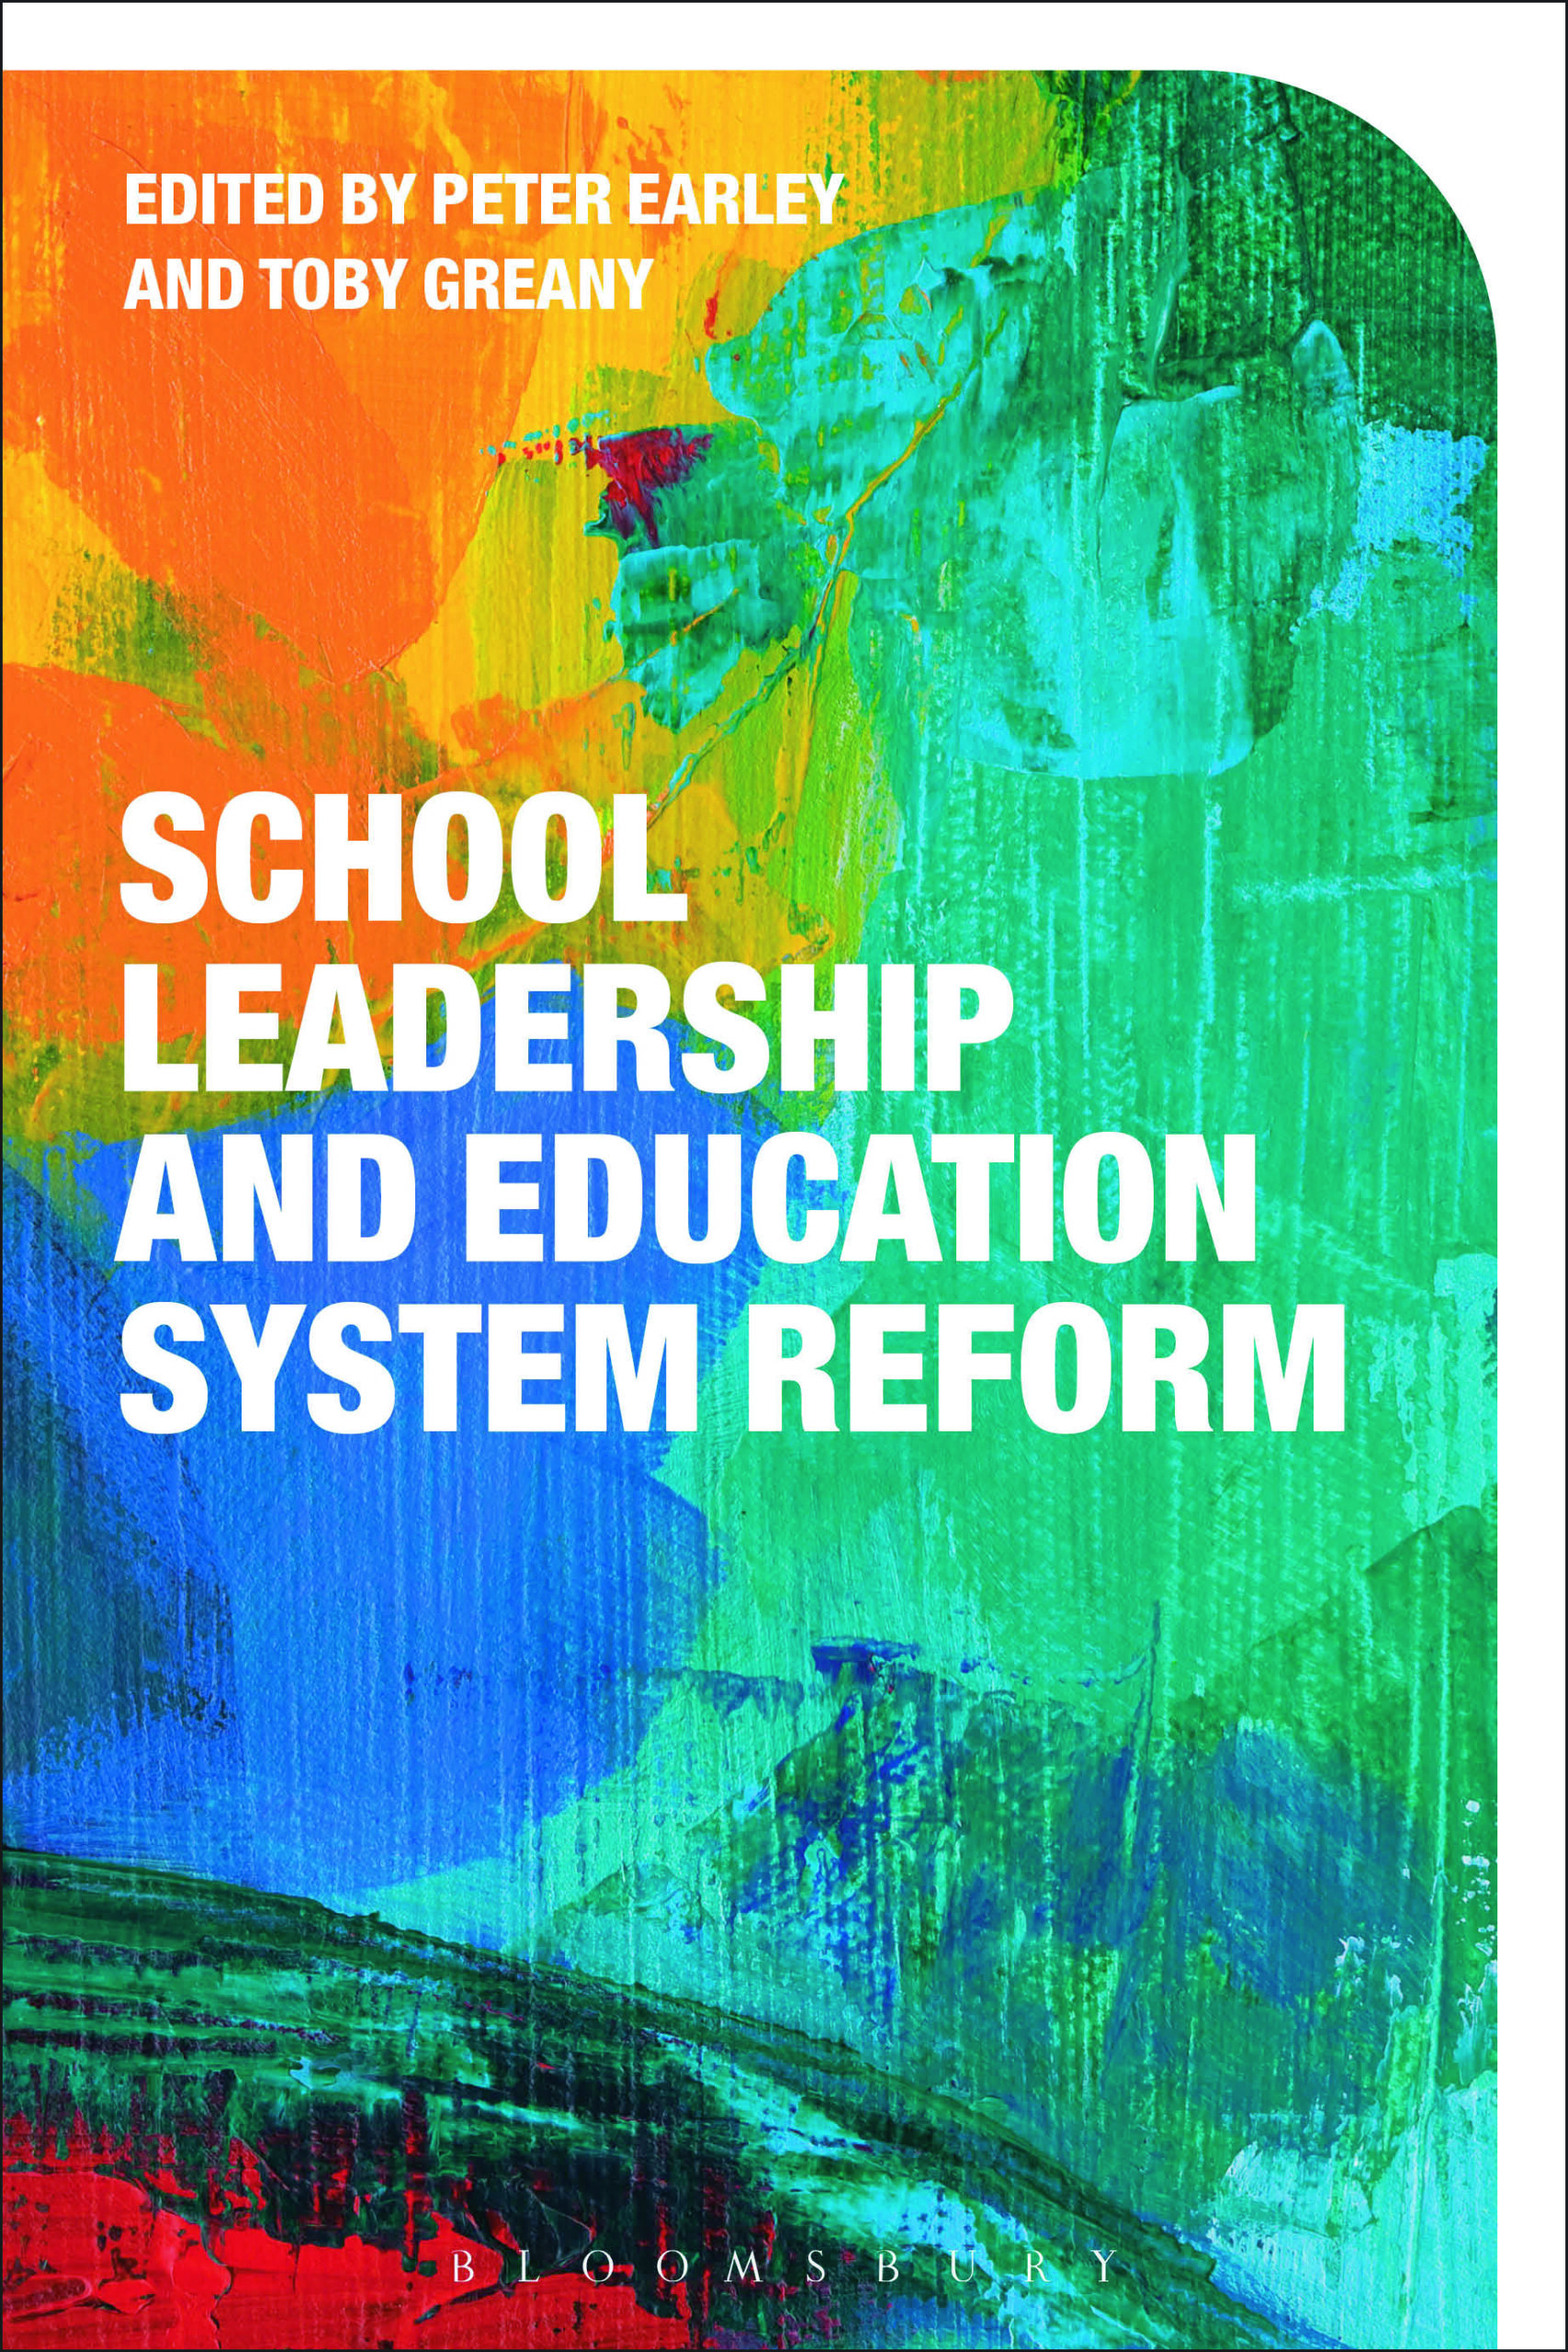 School Leadership and Education System Reform